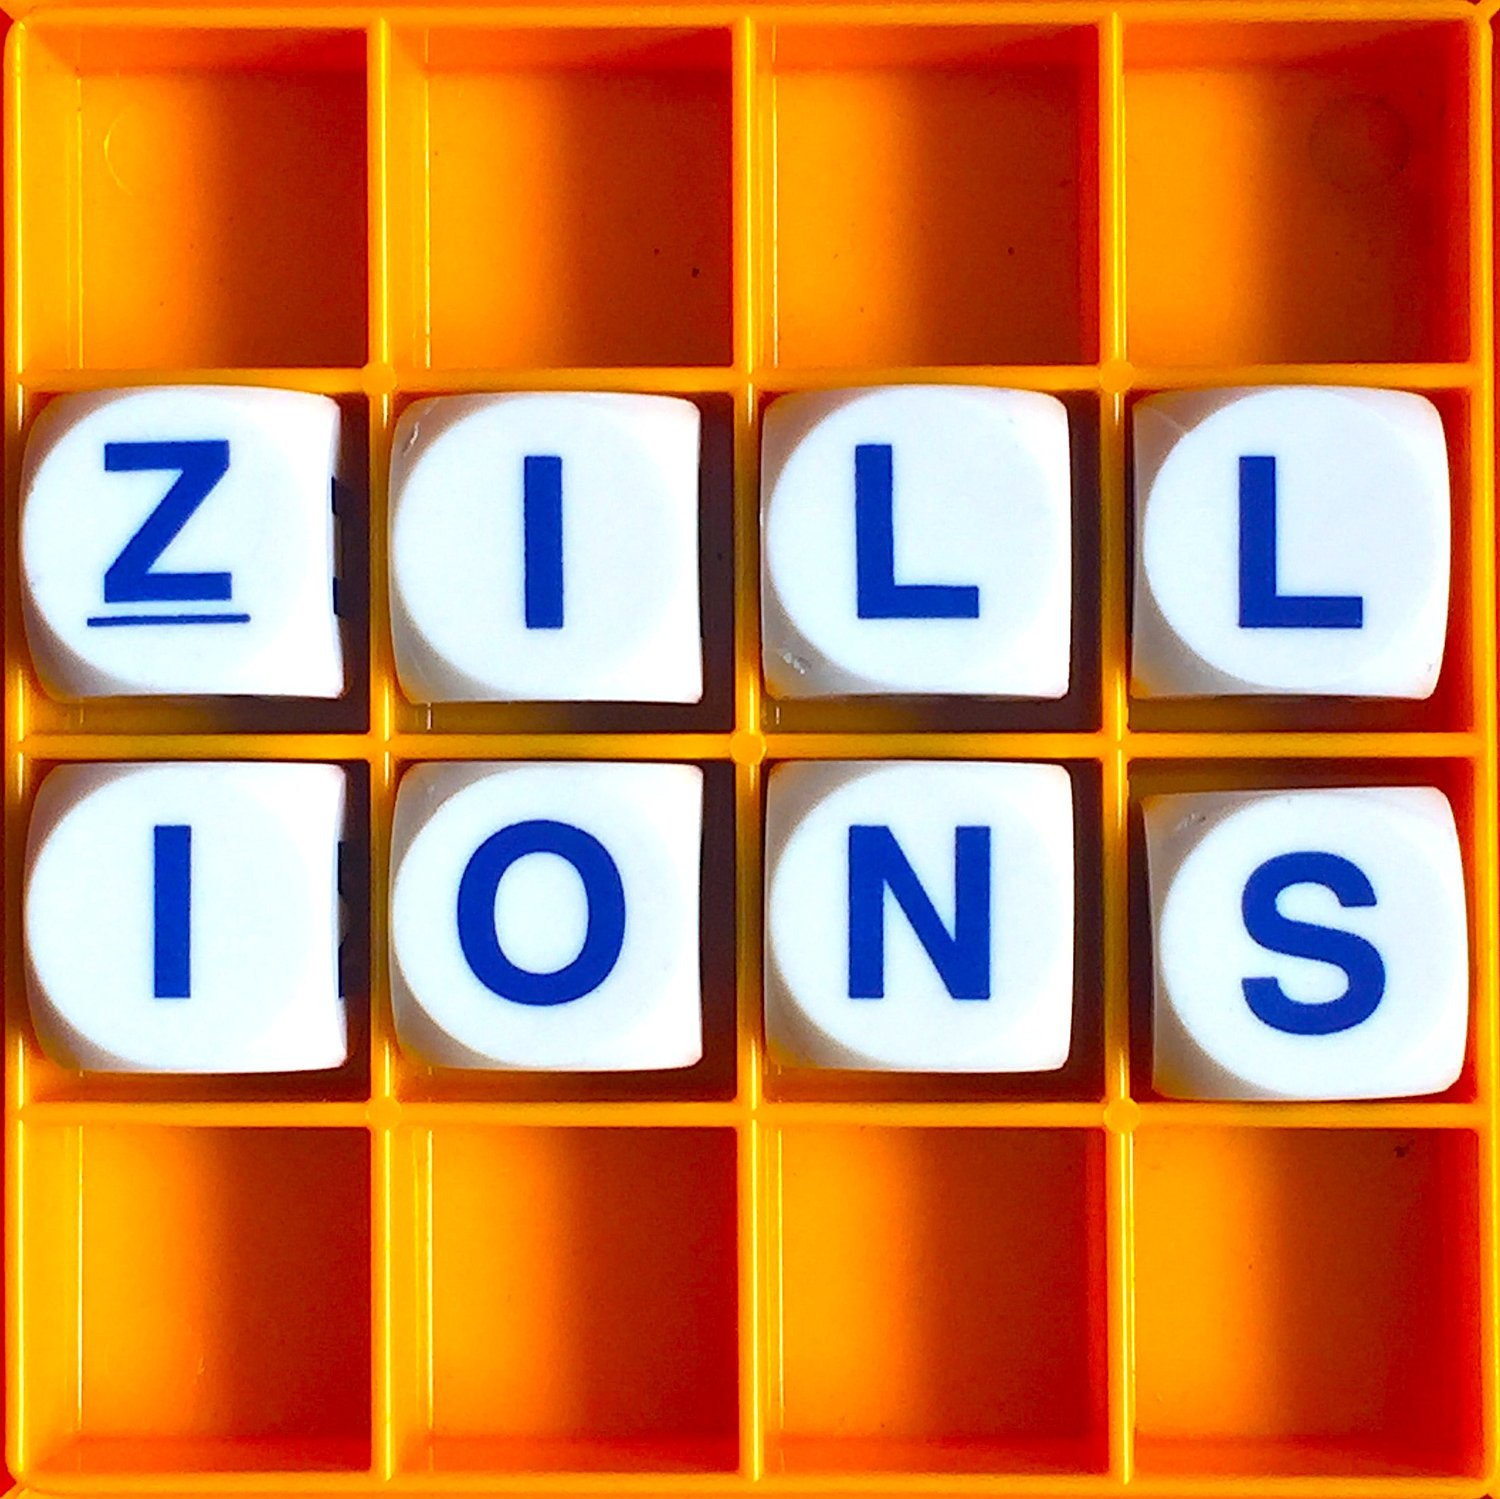 Thumbnail for "60. Zillions".